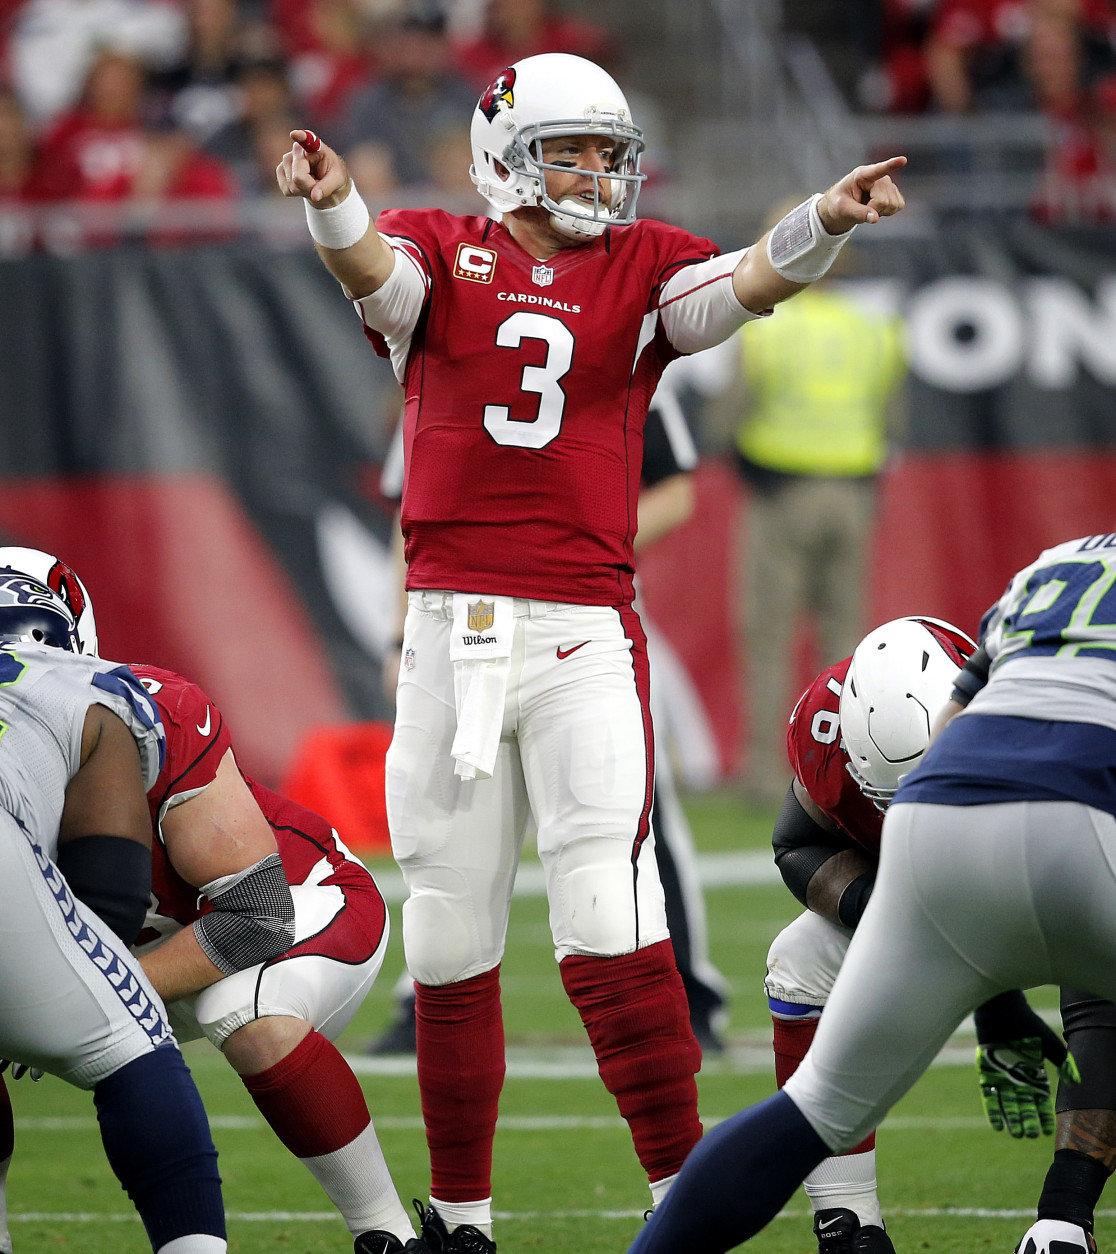 Arizona Cardinals quarterback Carson Palmer (3) calls a play against the Seattle Seahawks during the first half of an NFL football game, Sunday, Jan. 3, 2016, in Glendale, Ariz. (AP Photo/Ross D. Franklin)